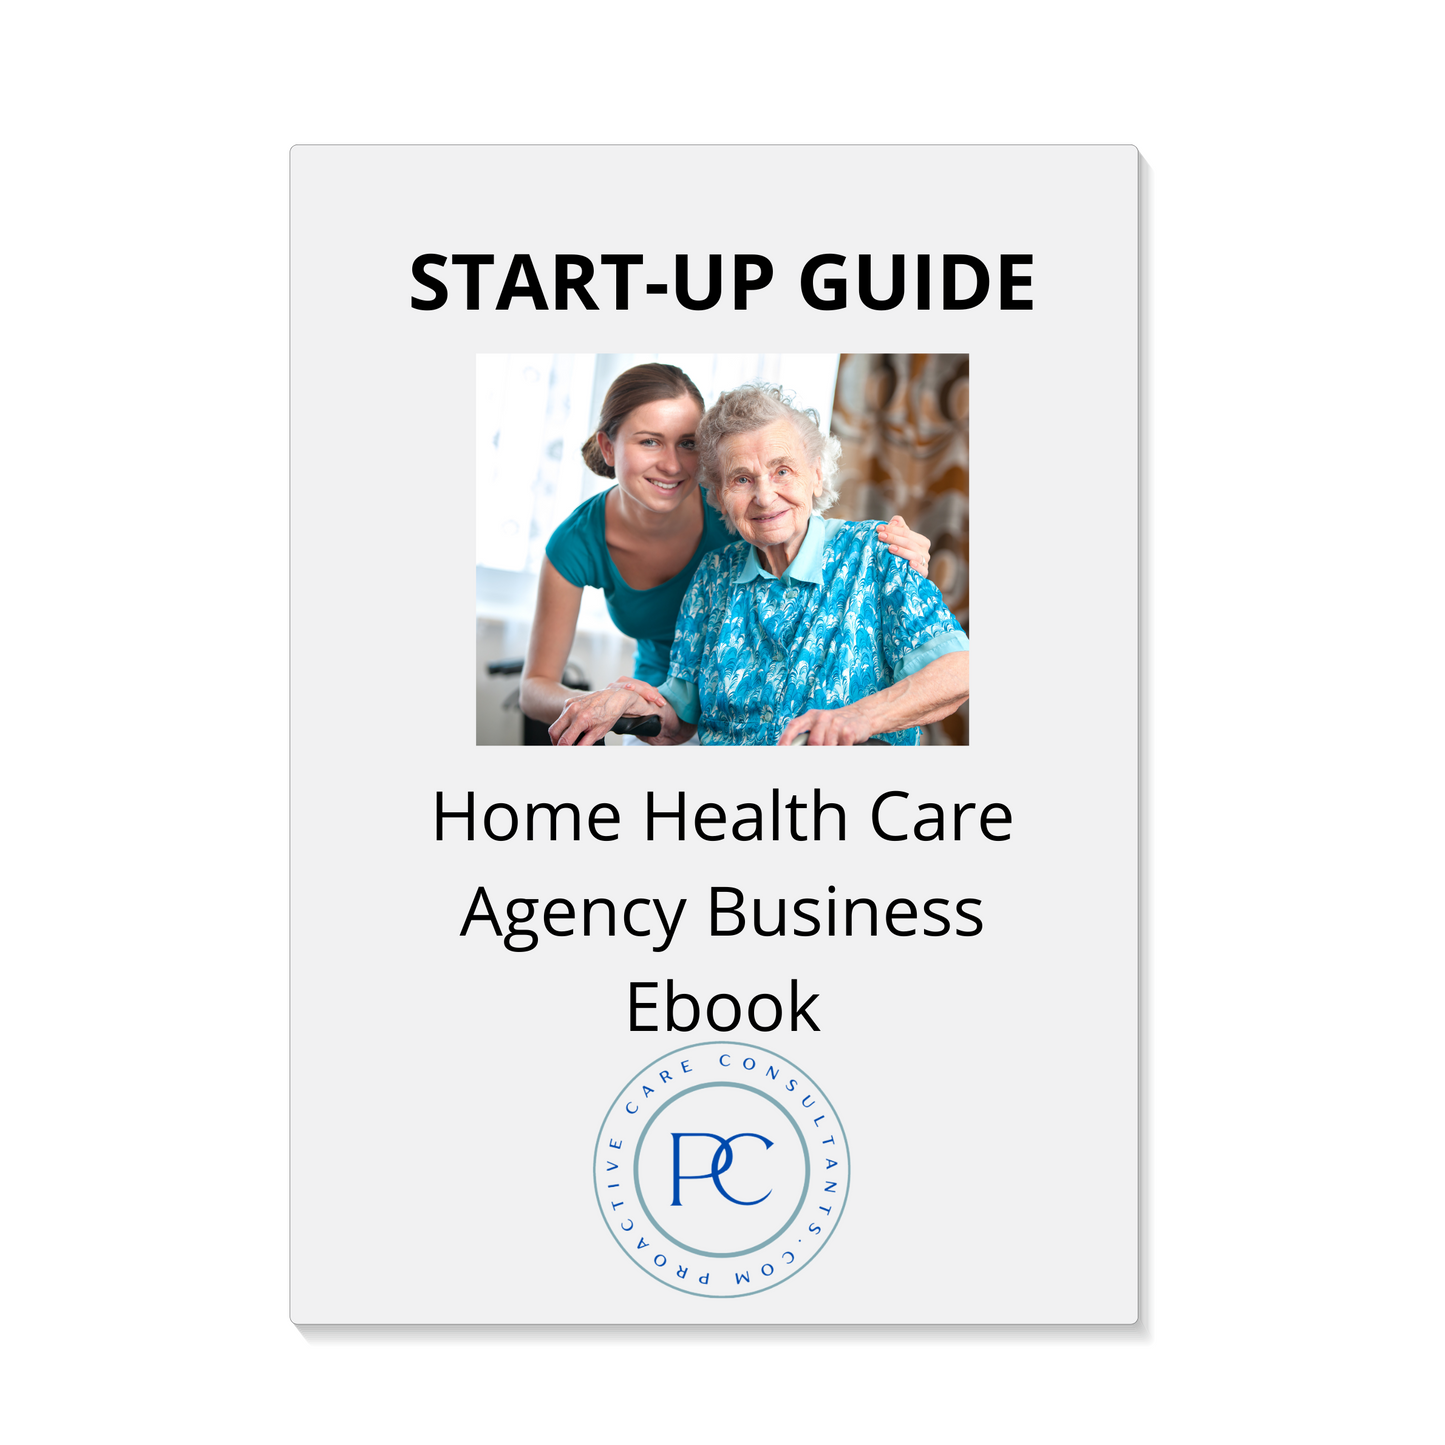 Home Health Care Agency Business Start-Up Guide eBook